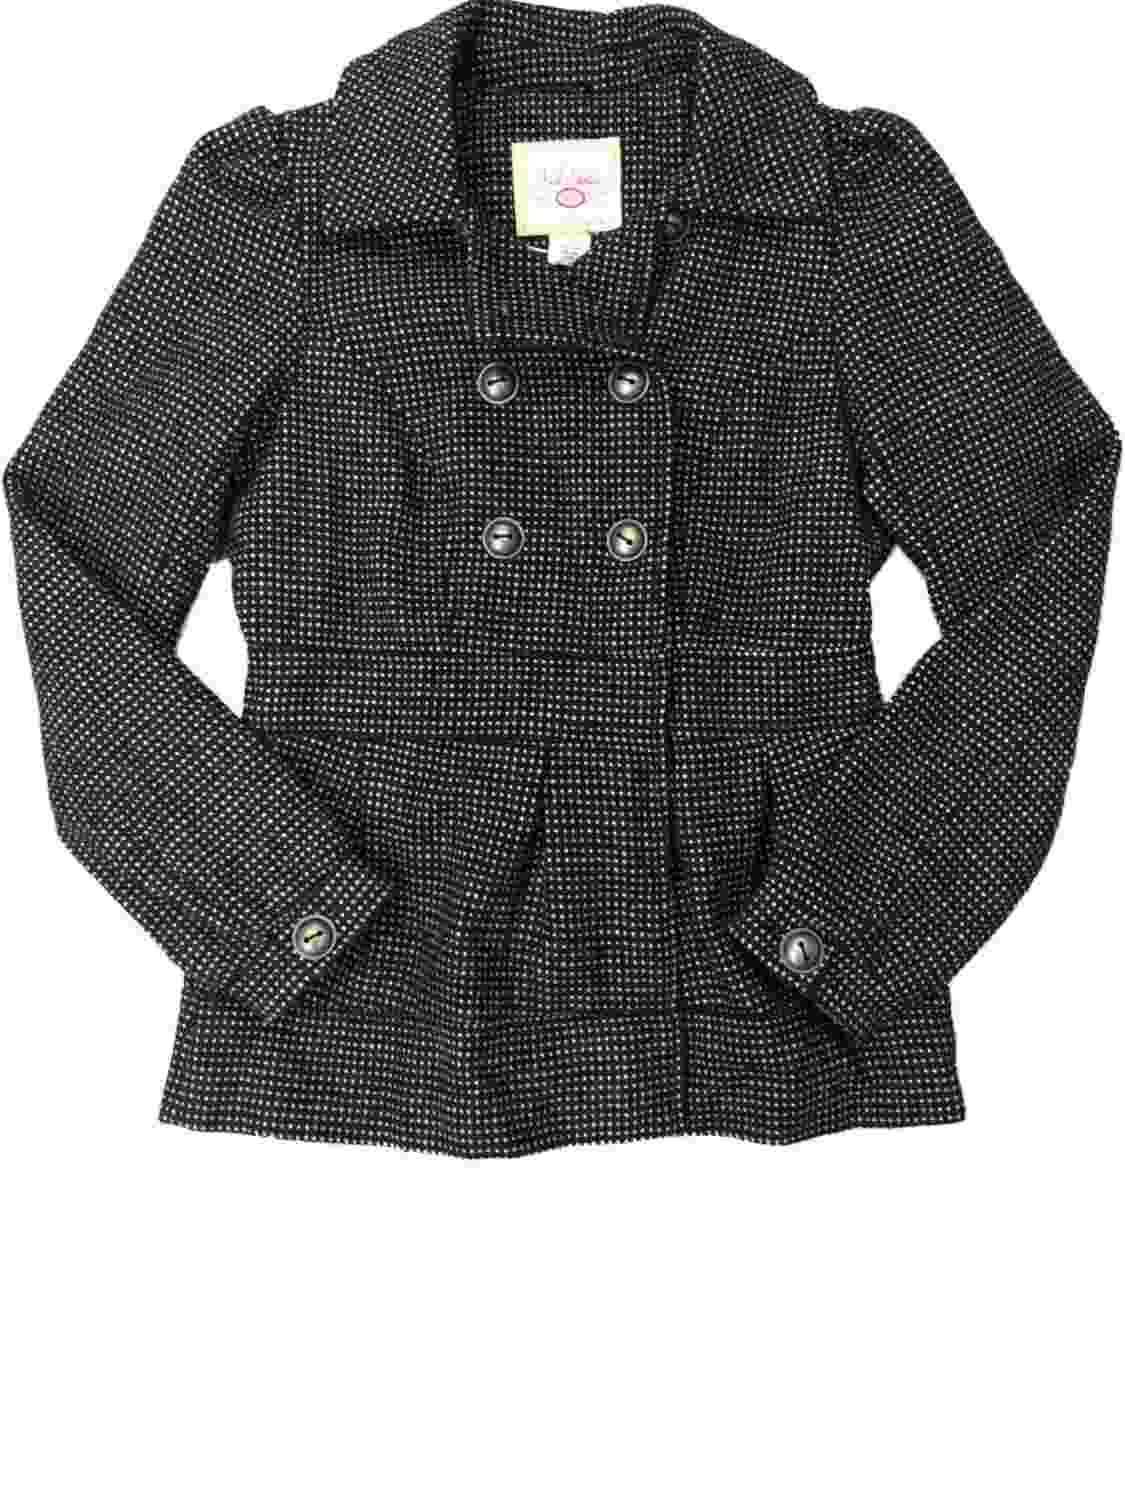 Womens Black & Pink Polka Dot Peacoat Jacket Lined Button Up Coat Small - image 1 of 1